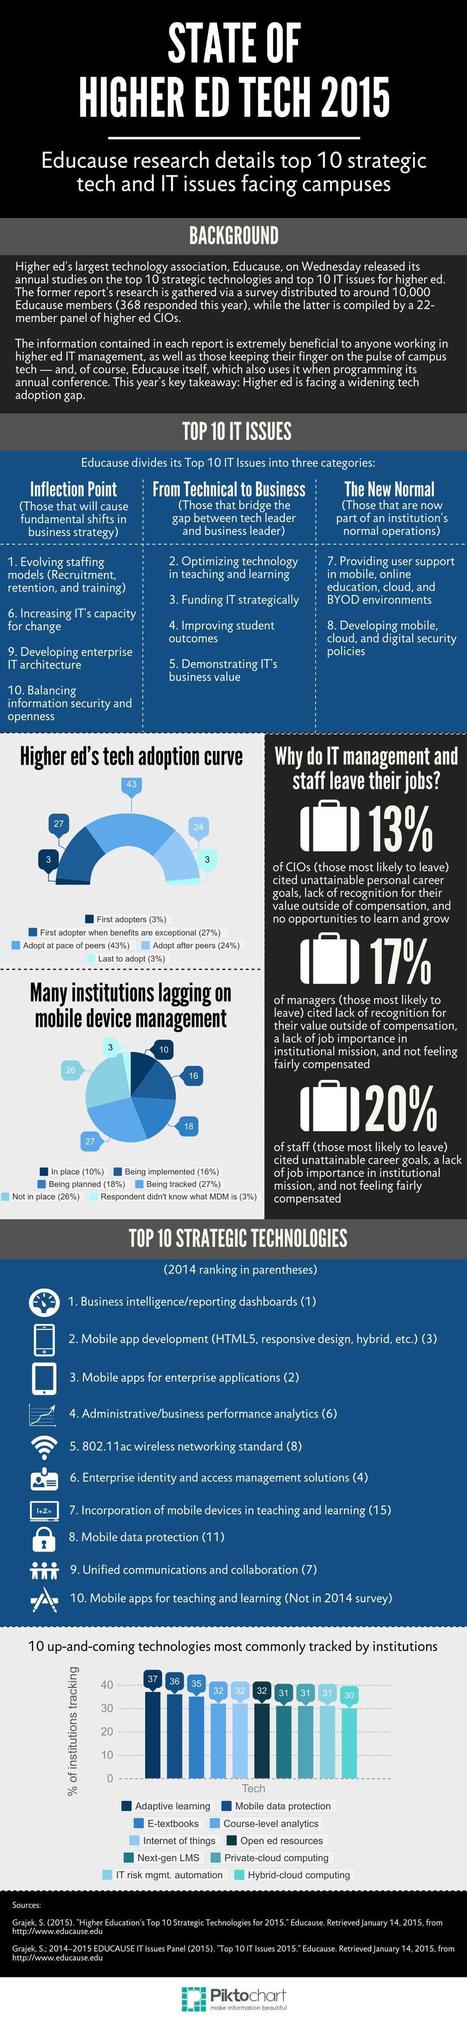 What you need to know about Educause's latest research [Infographic] | Digital Literacies information sources | Scoop.it